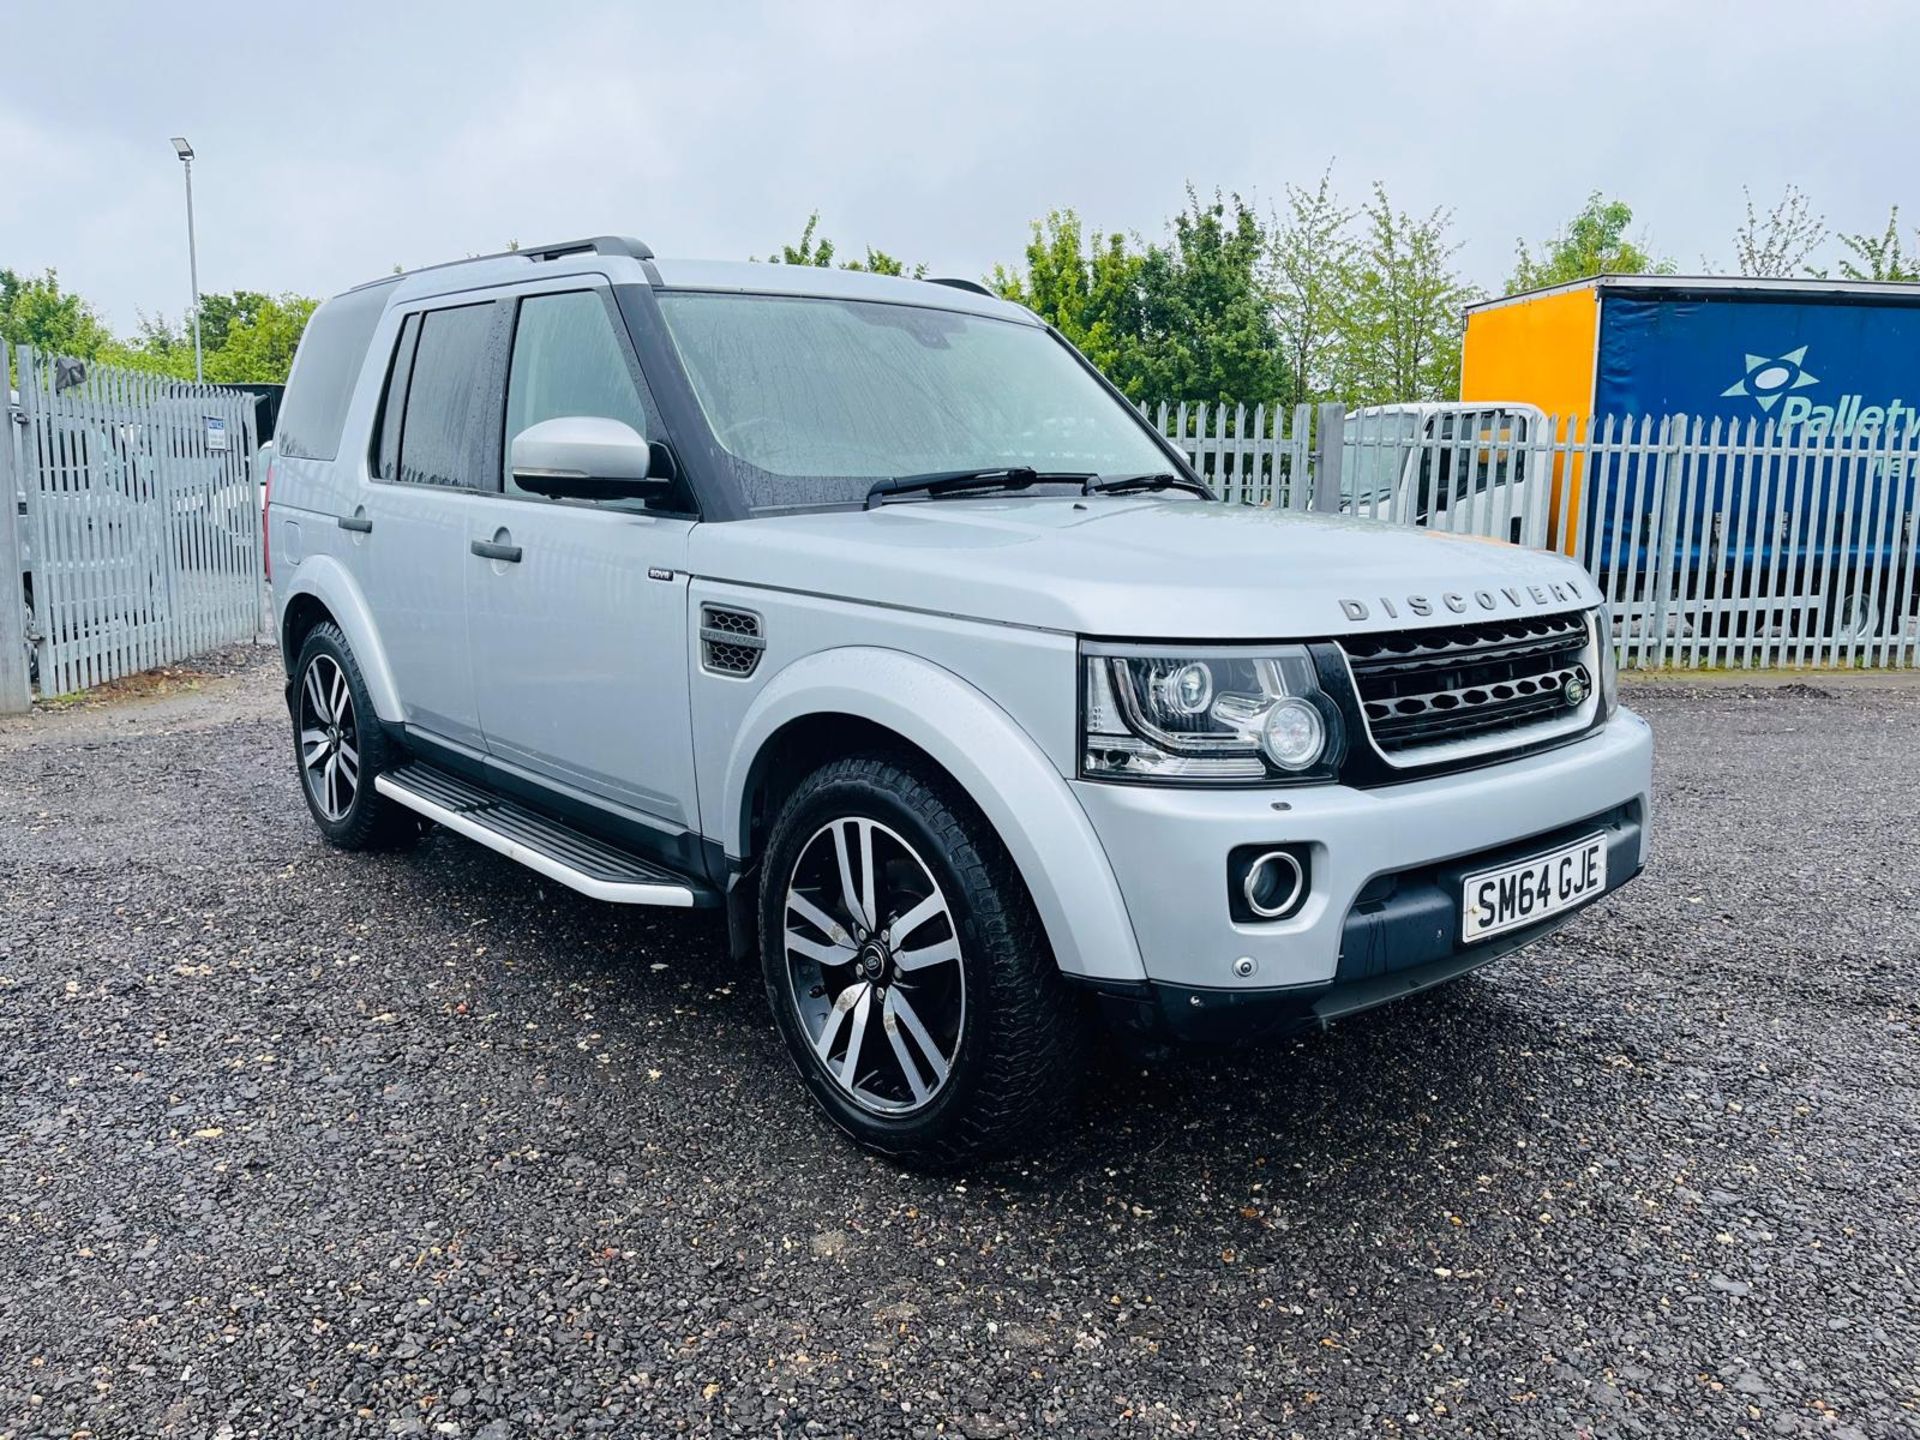 ** ON SALE ** Land Rover Discovery 4 3.0 SD V6 255 2014 '64 Reg' - A/C - Alloy Wheels - Tow Bar